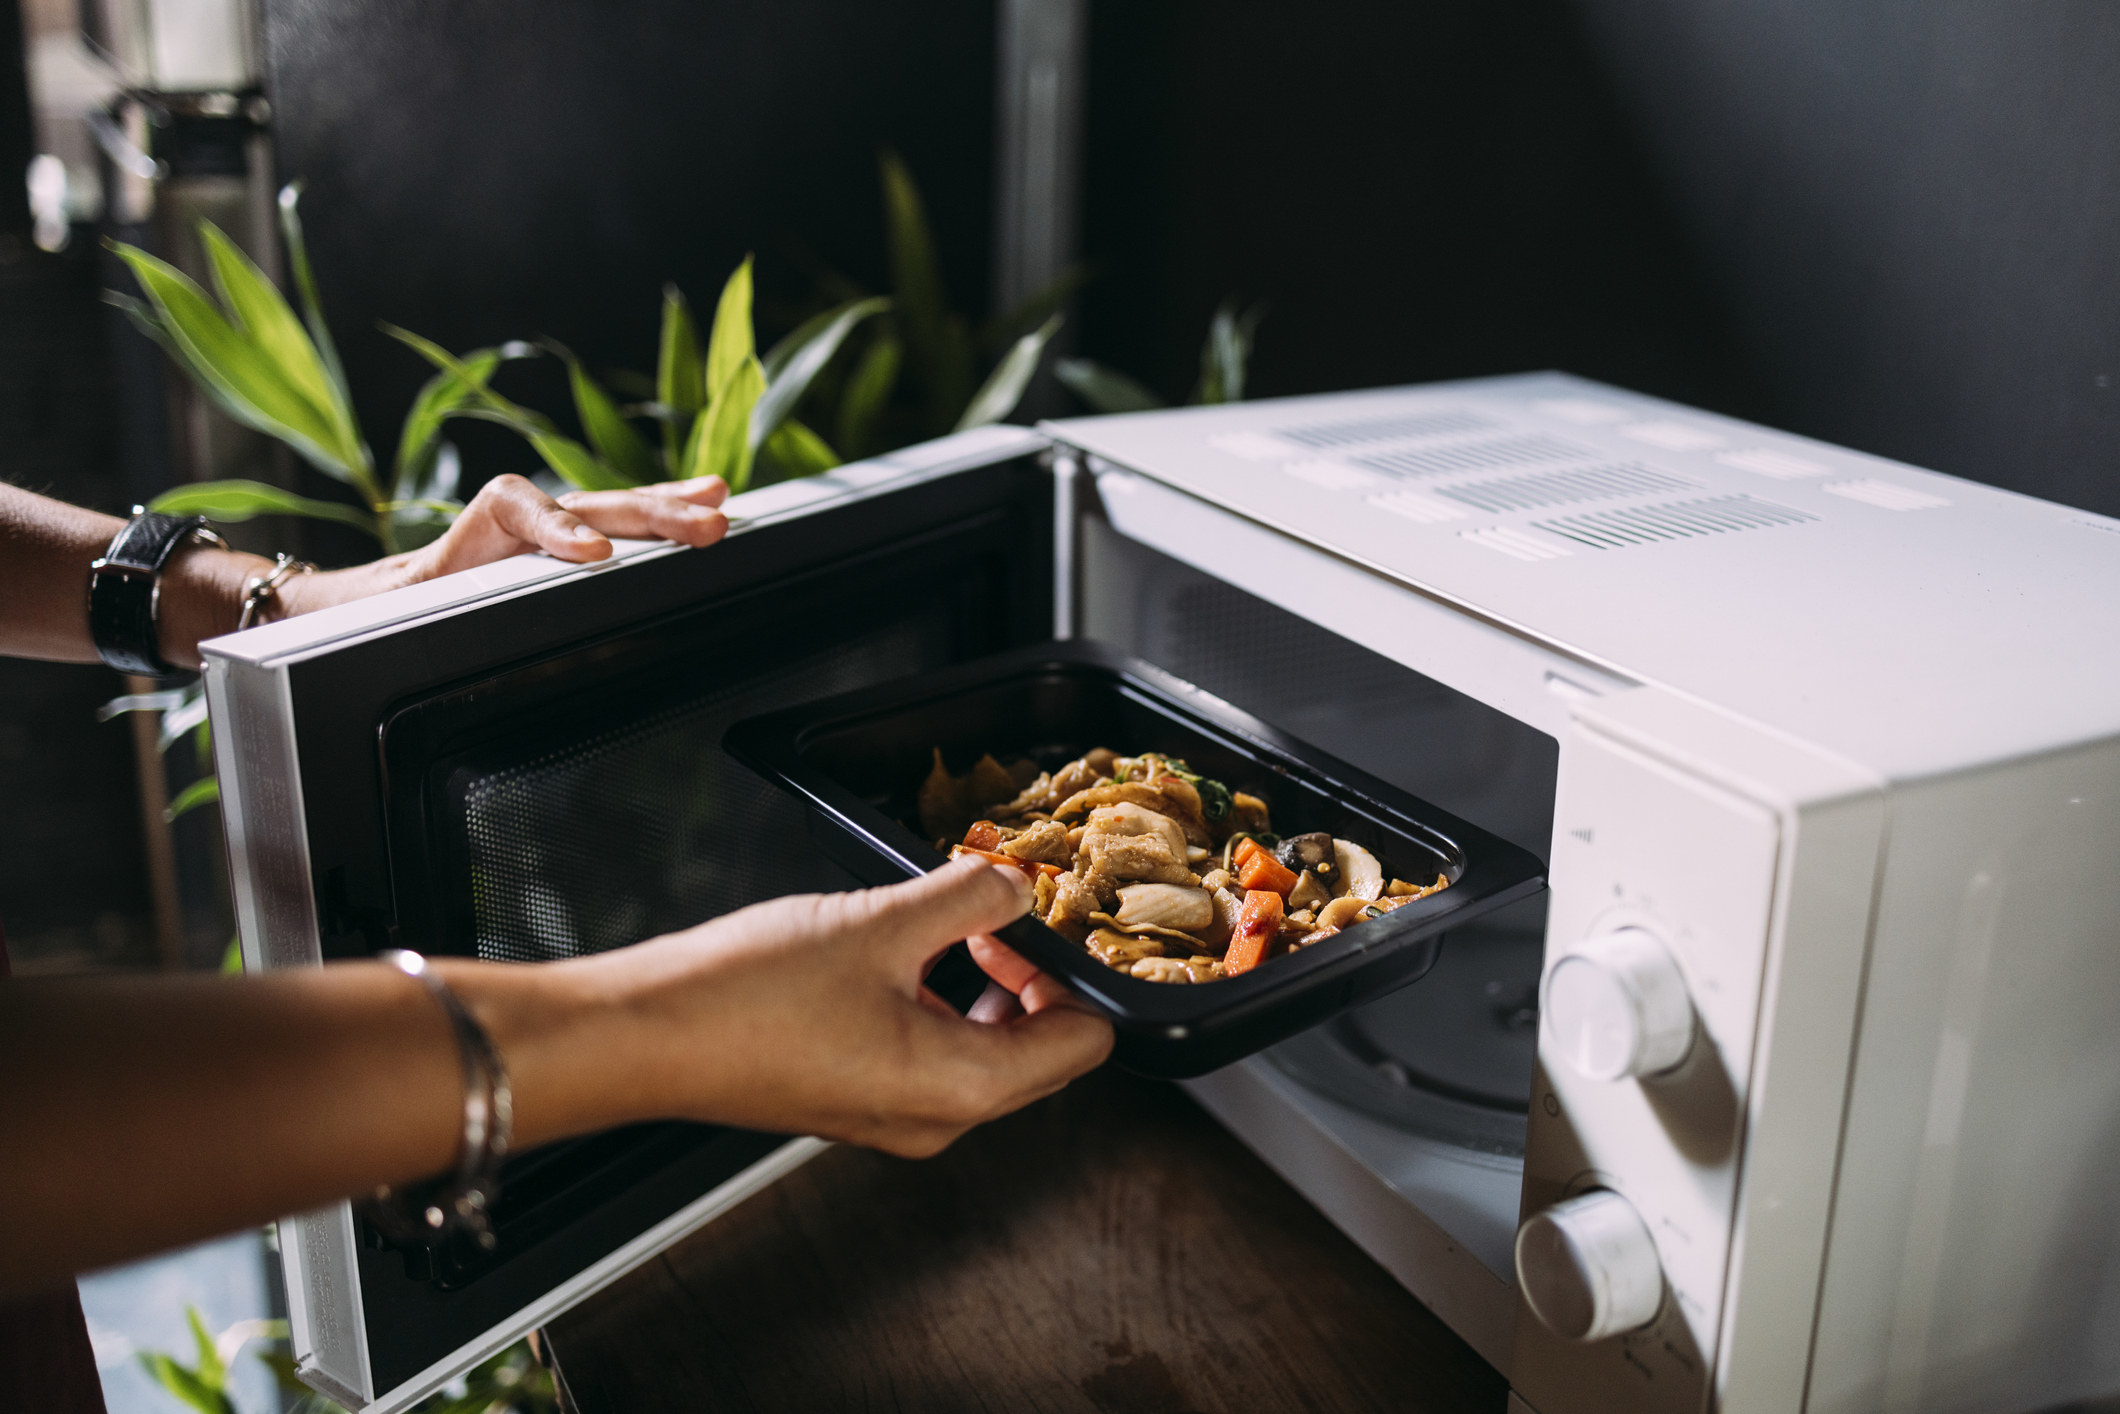 Person placing a tray of food into a microwave, with green plants in the background